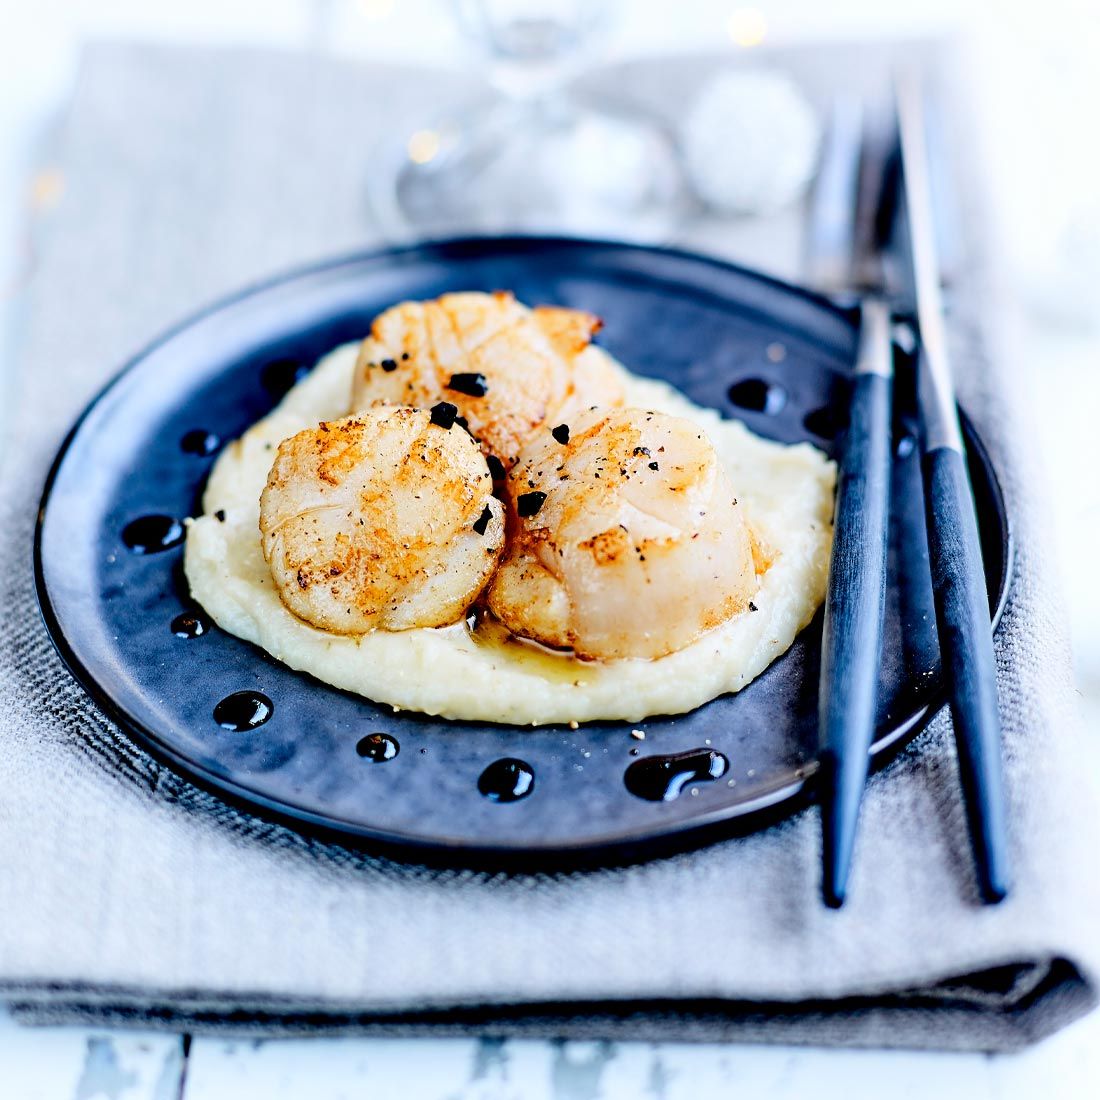 Roasted Scallops with Truffle Oil